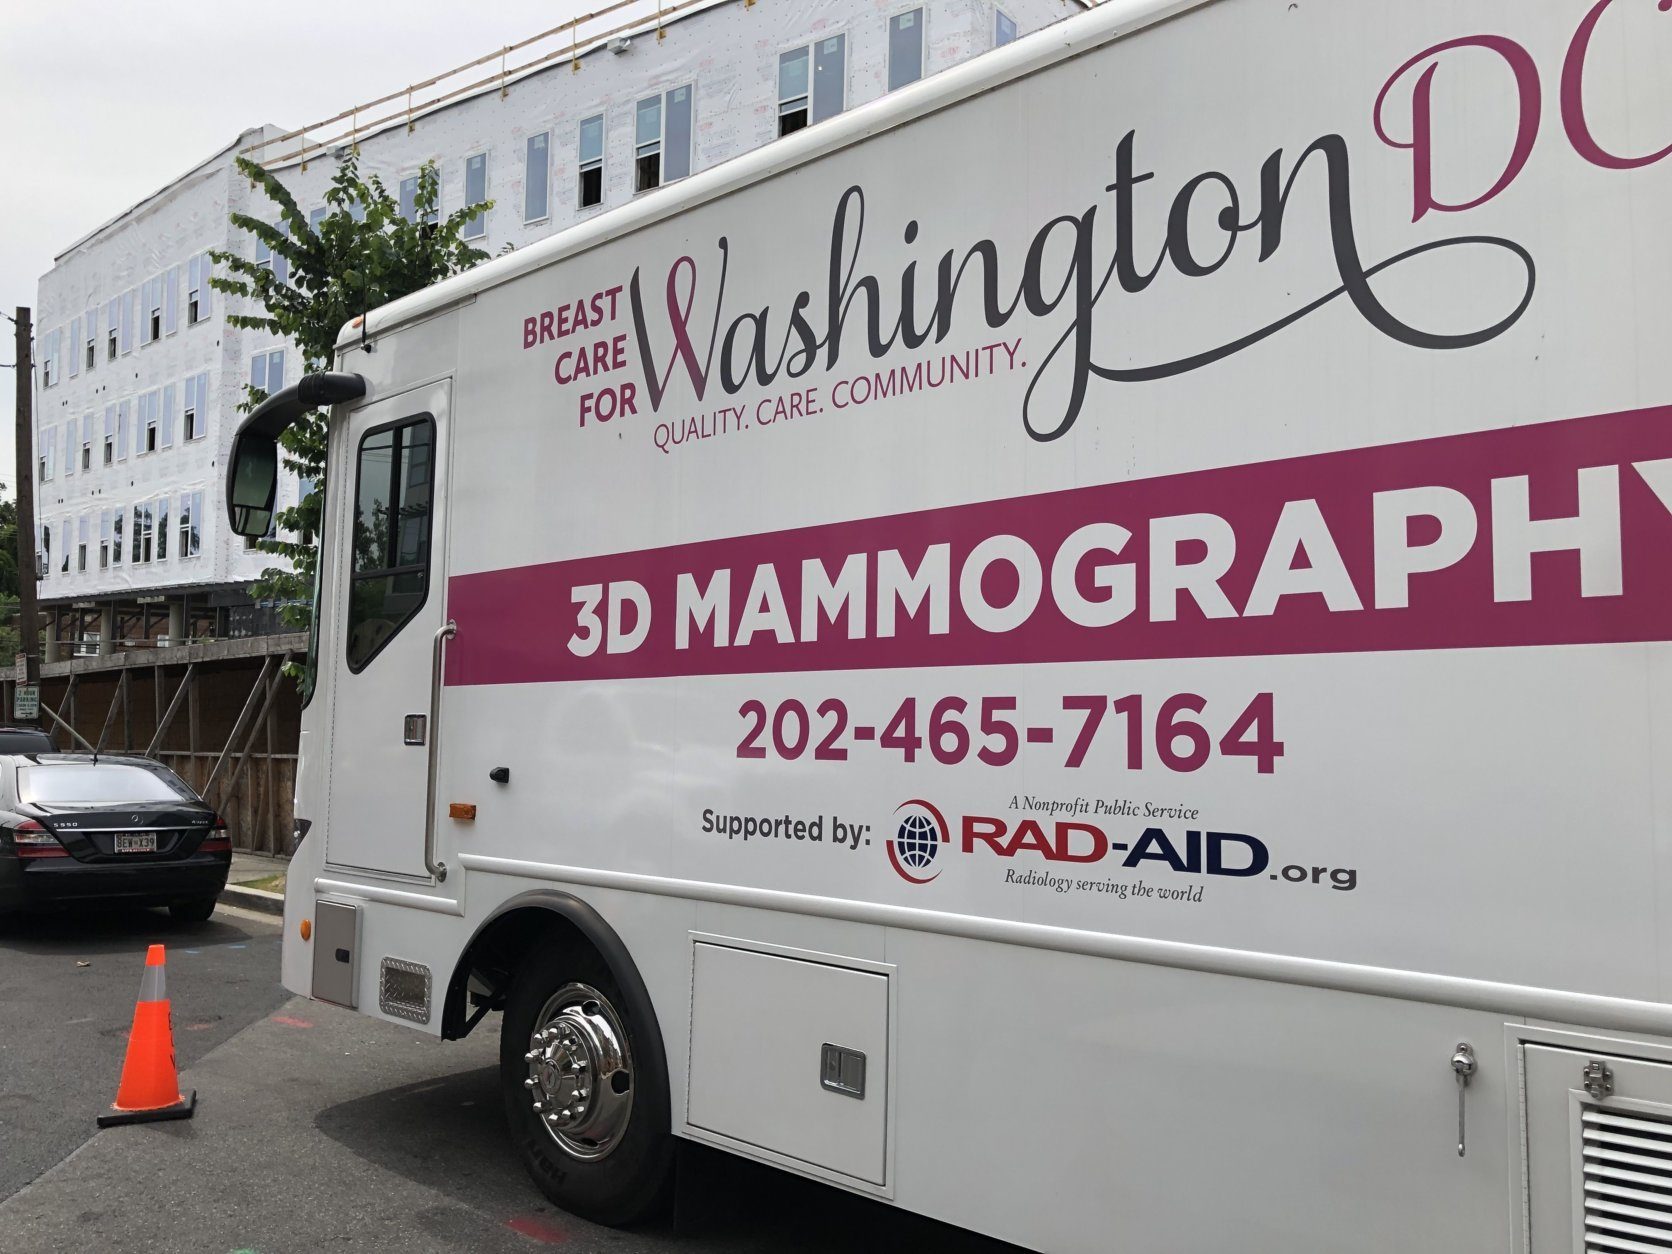 Breast Care for Washington, a group that aims to provide screening and care to underserved D.C. populations, rolled out the MobileMammo program at an event Wednesday. It will provide 3D mammograms aboard a 45-foot bus. (WTOP/Kristi King)